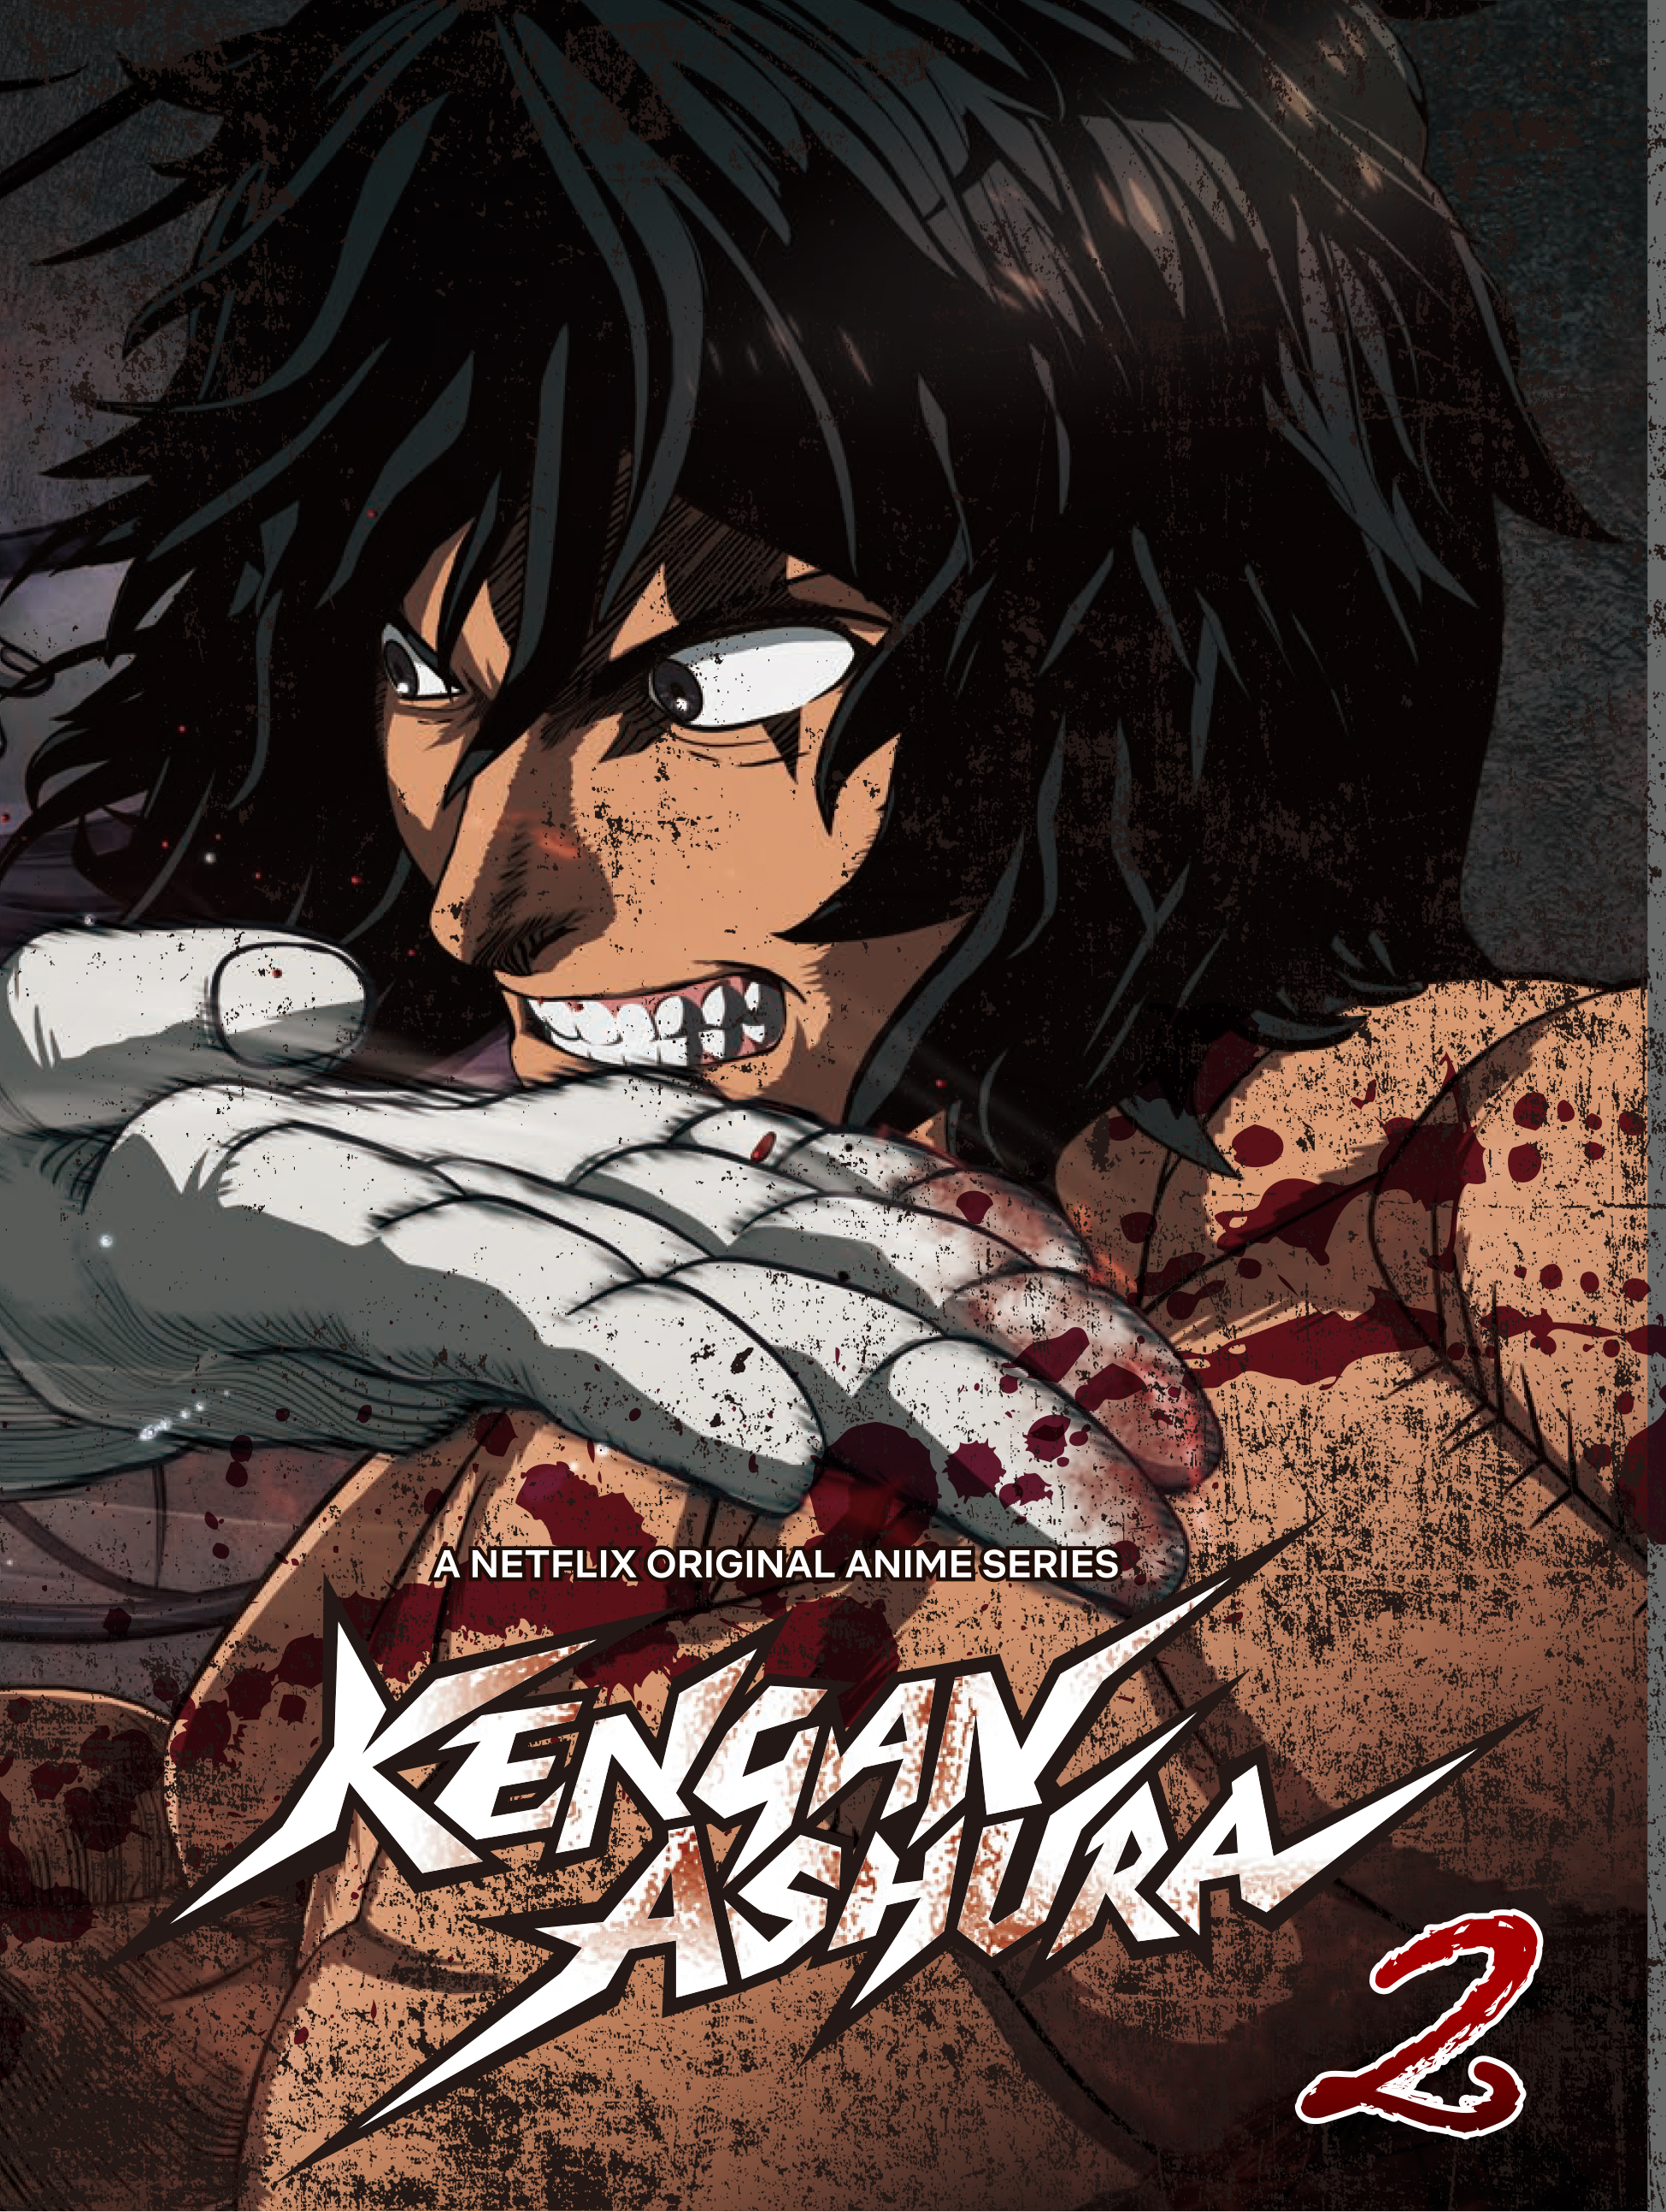 I'm glad we got the kengan ashura anime this year, but I'm very  disappointed that we didn't see raian vs the two rankers 5 and 3. This  would have been great if